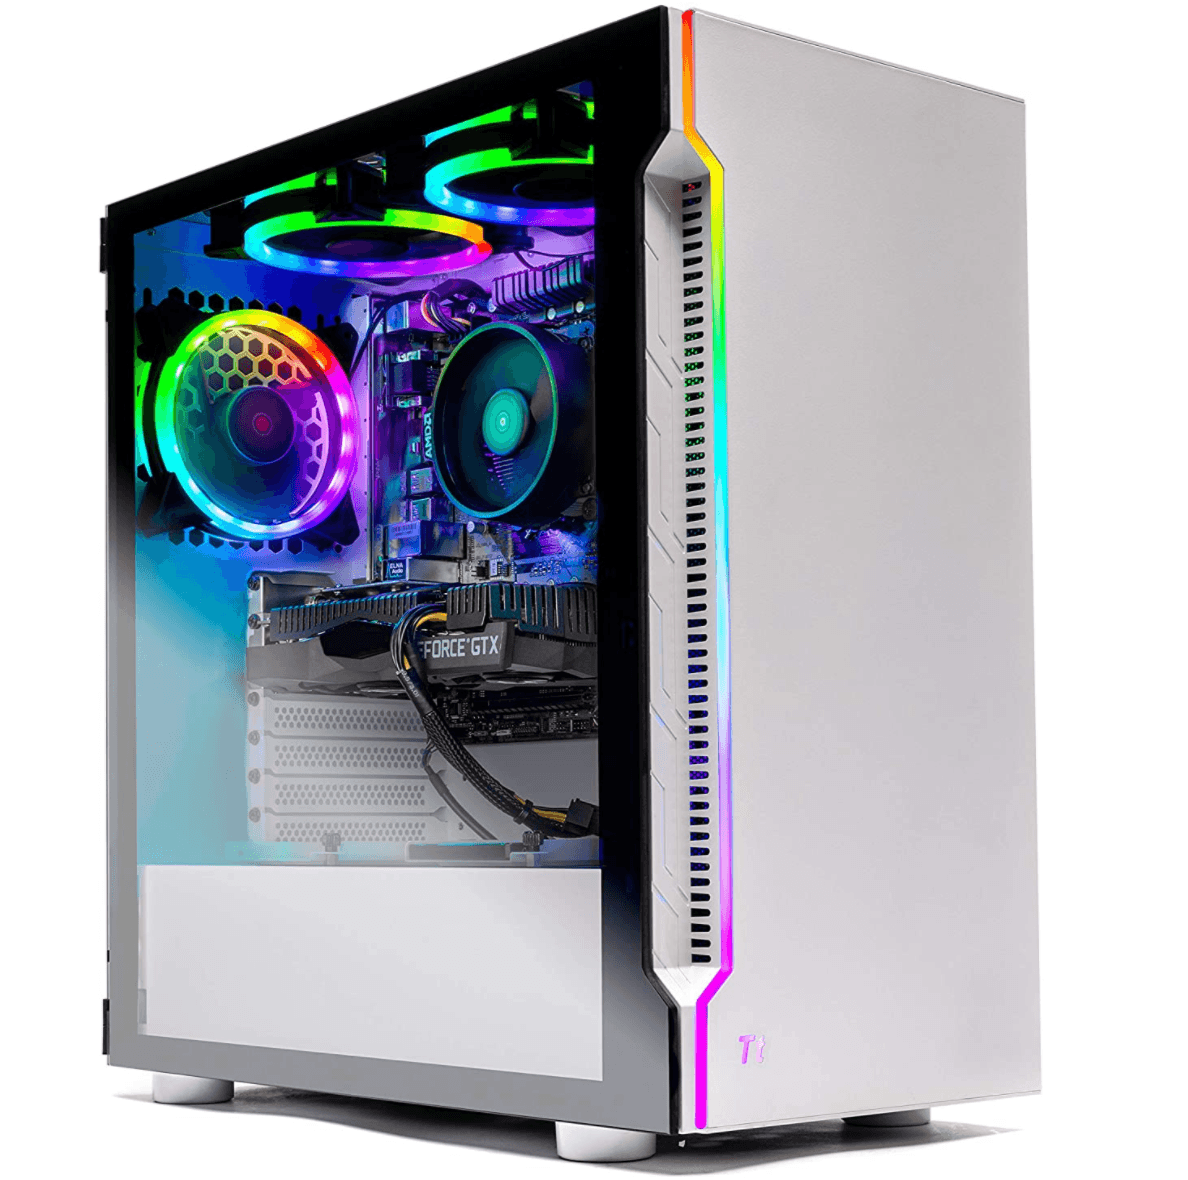 Curved Gaming Pc Build 2020 Under 1000 for Streamer